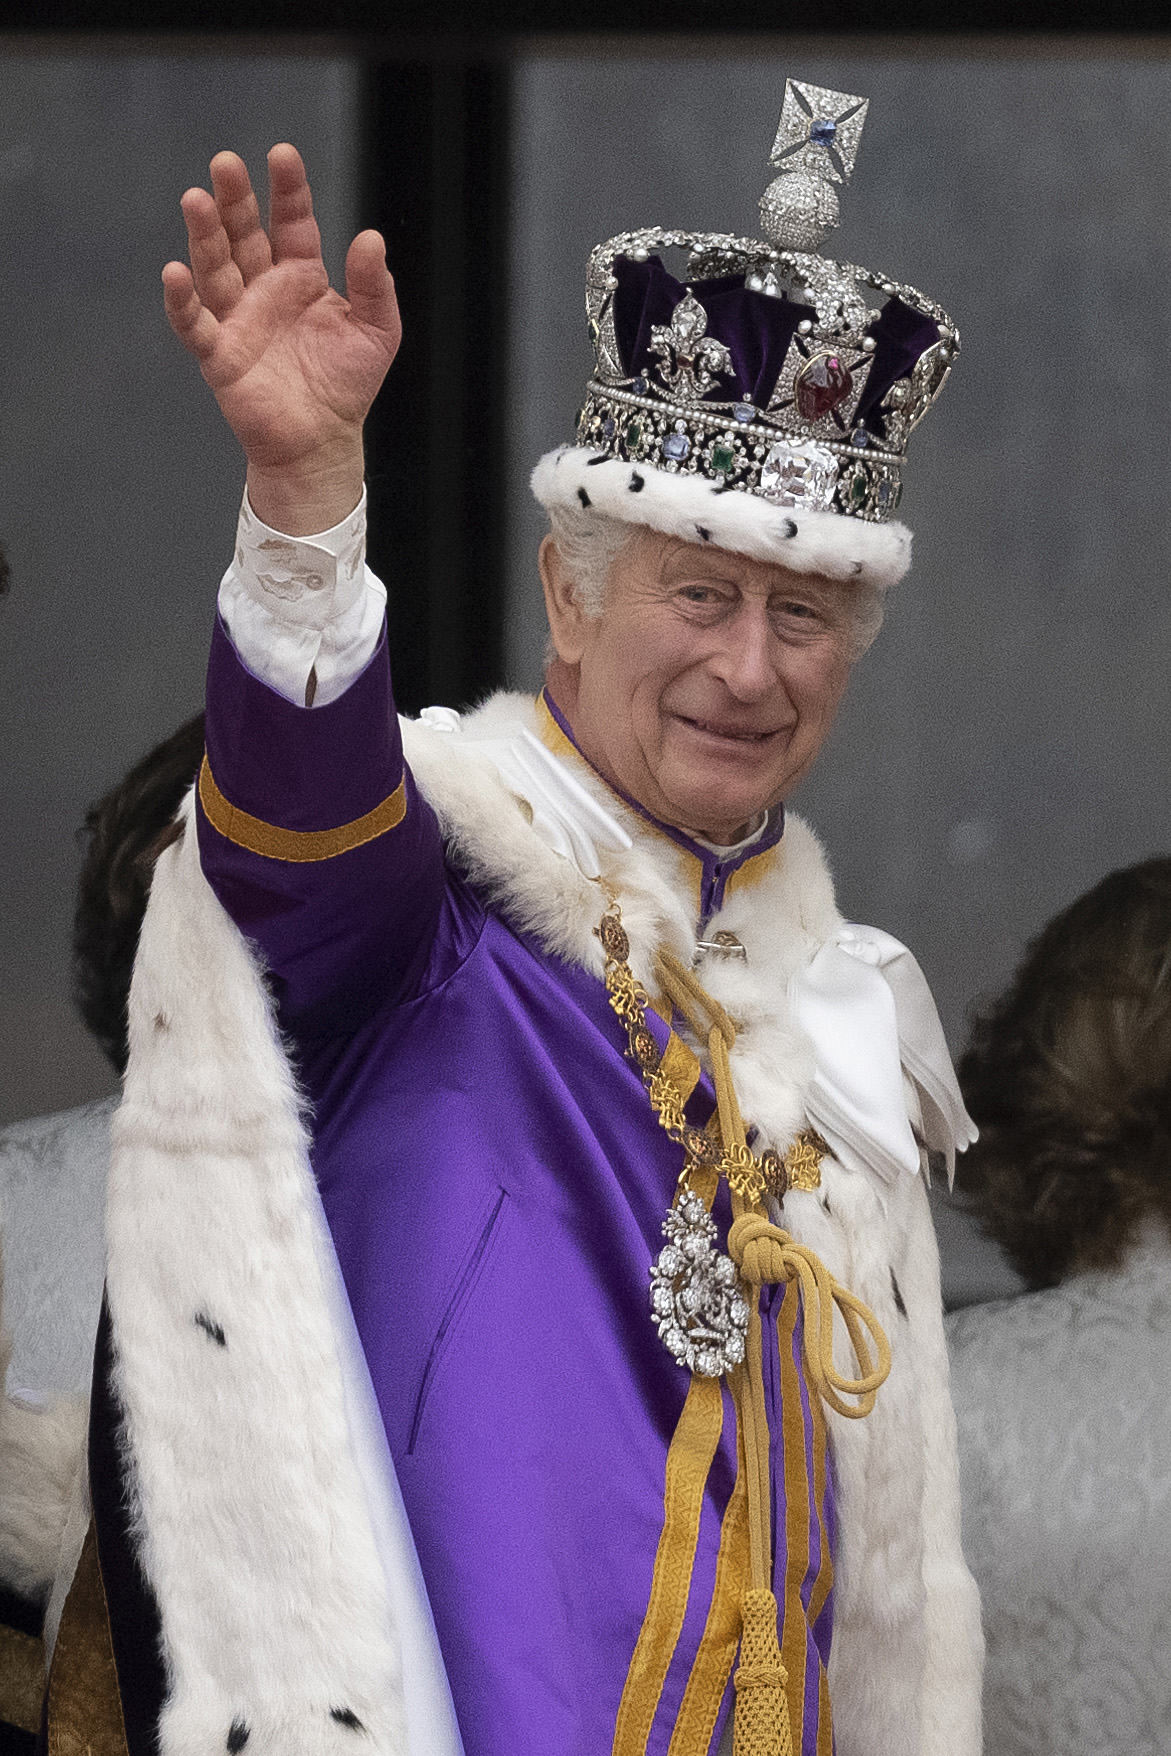 King Charles III waves after his Coronation in London, England, on May 6, 2023. | Source: Getty Images